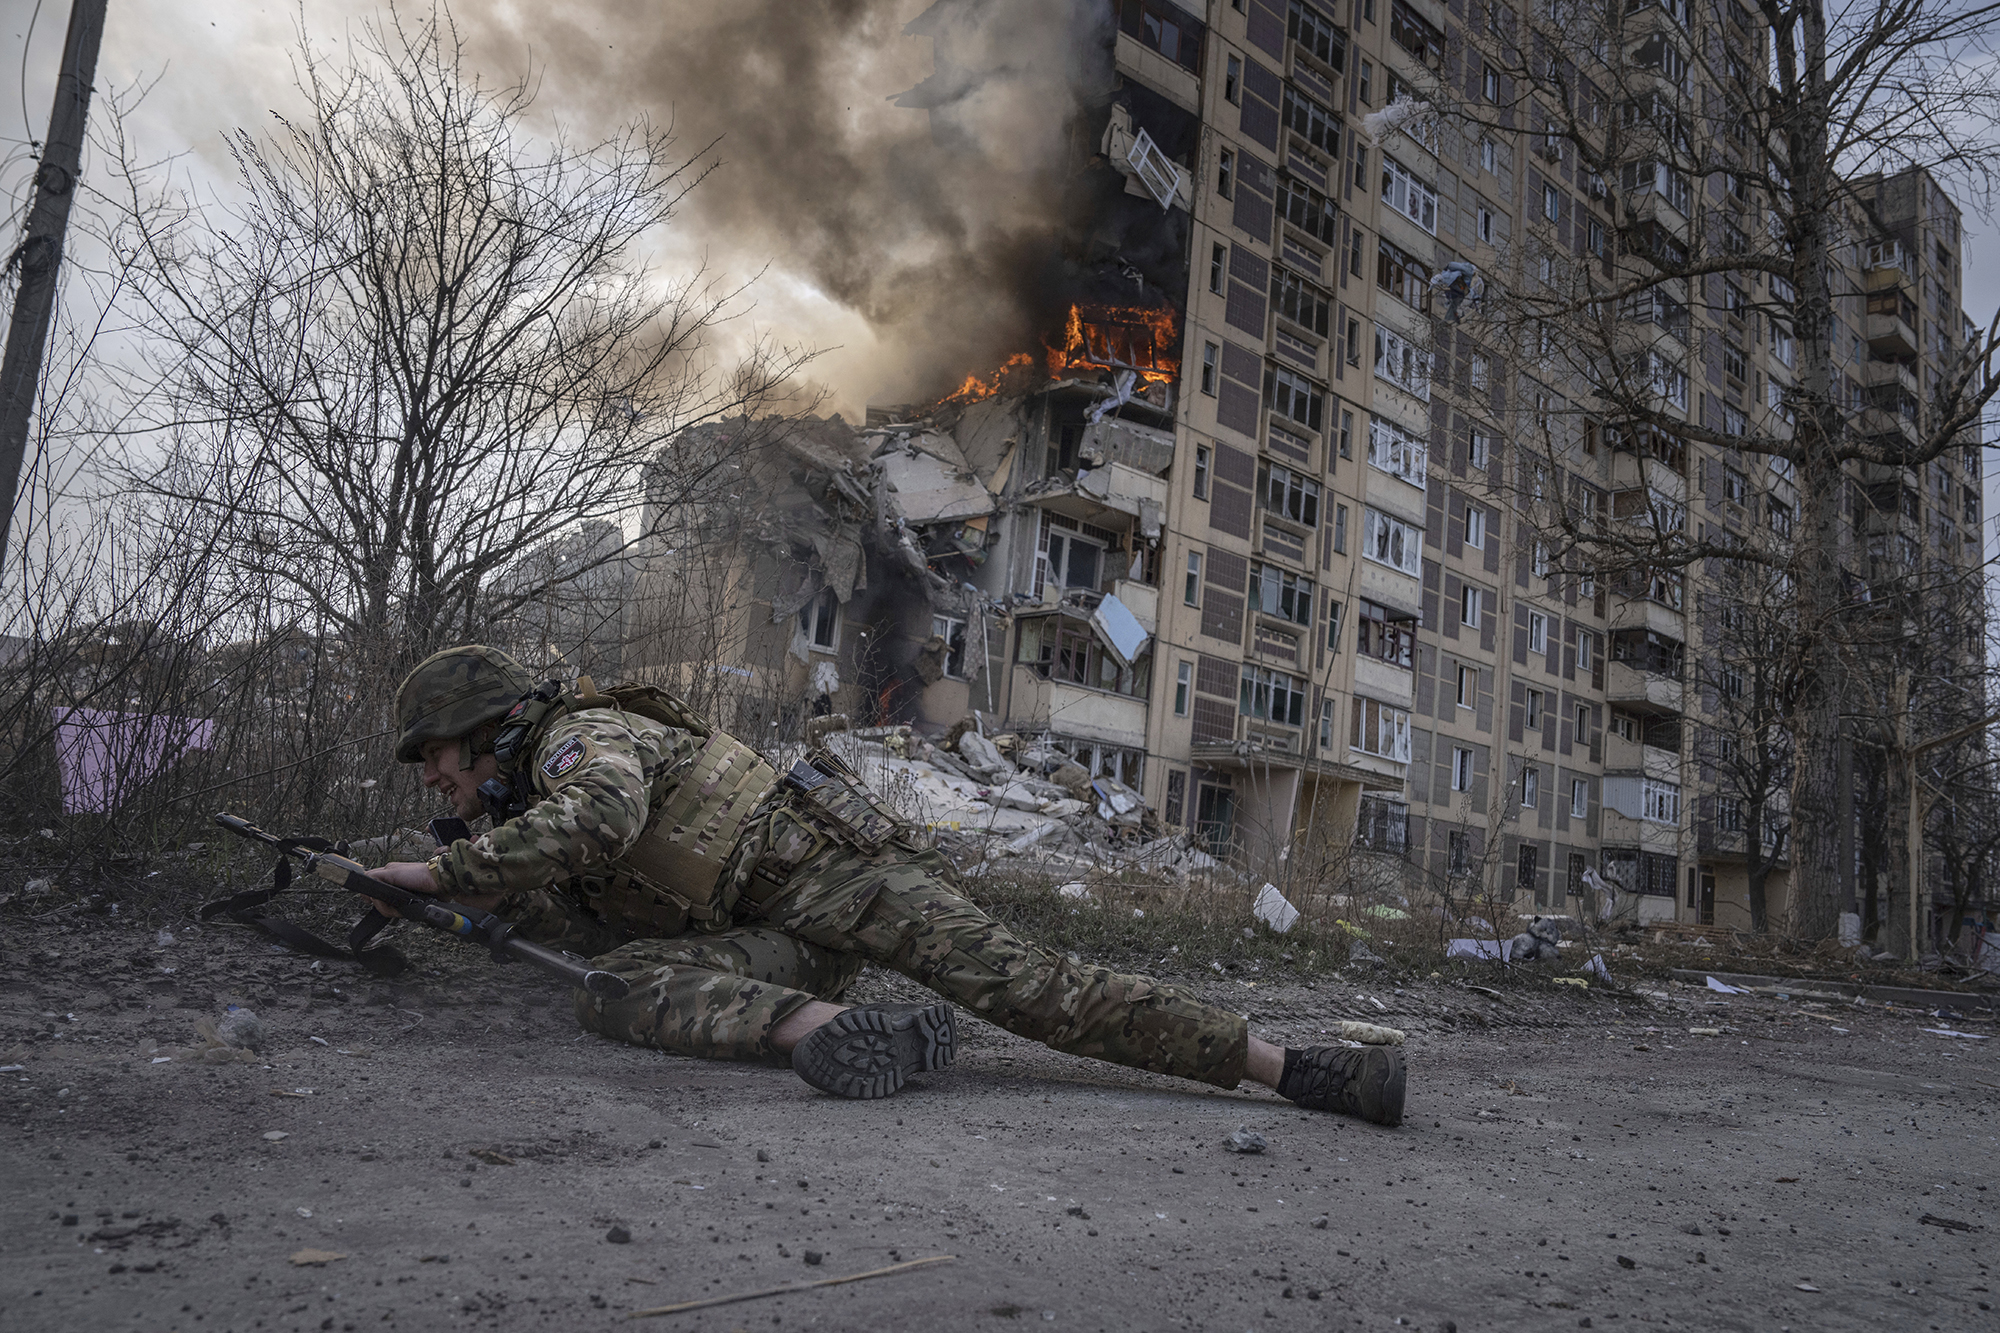 A Ukrainian police officer takes cover in front of a burning building that was hit in a Russian airstrike in Avdiivka, Ukraine, on March 17.